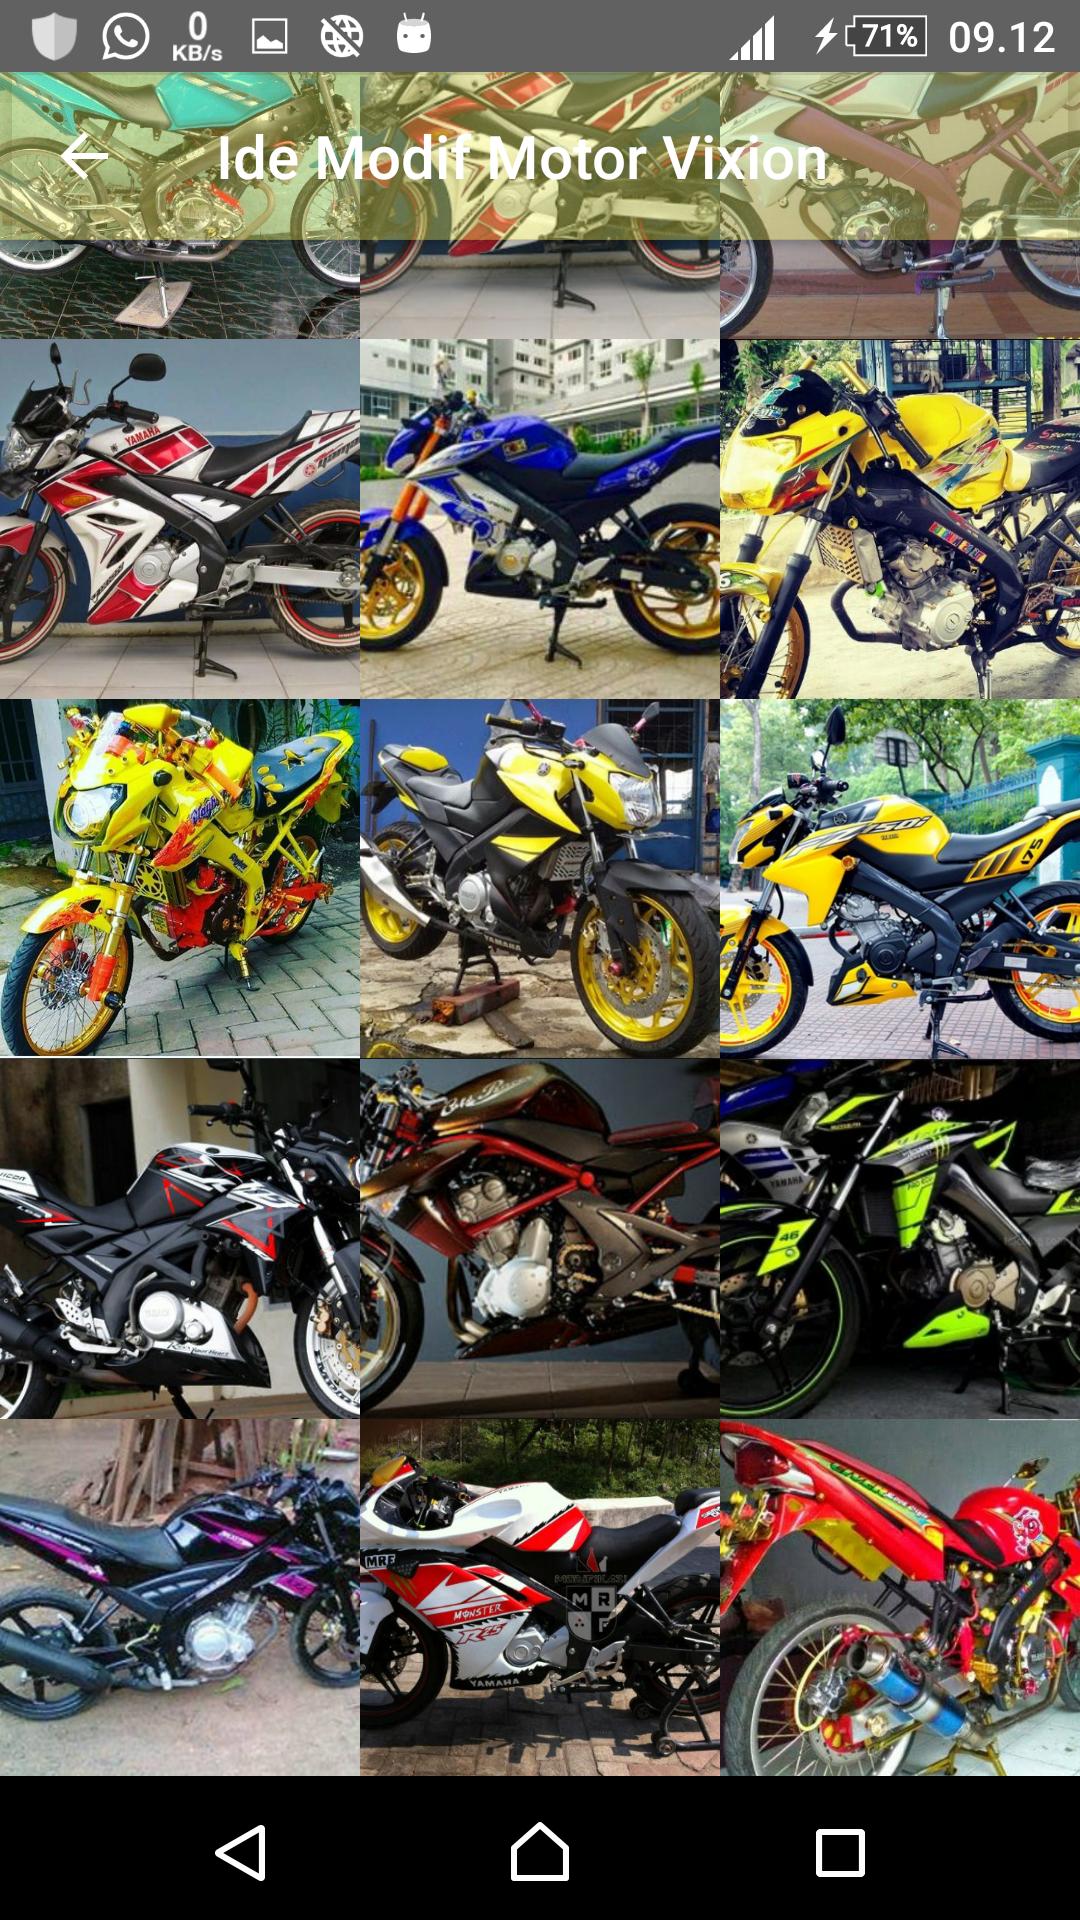 Ide Modif Motor Vixion For Android Apk Download